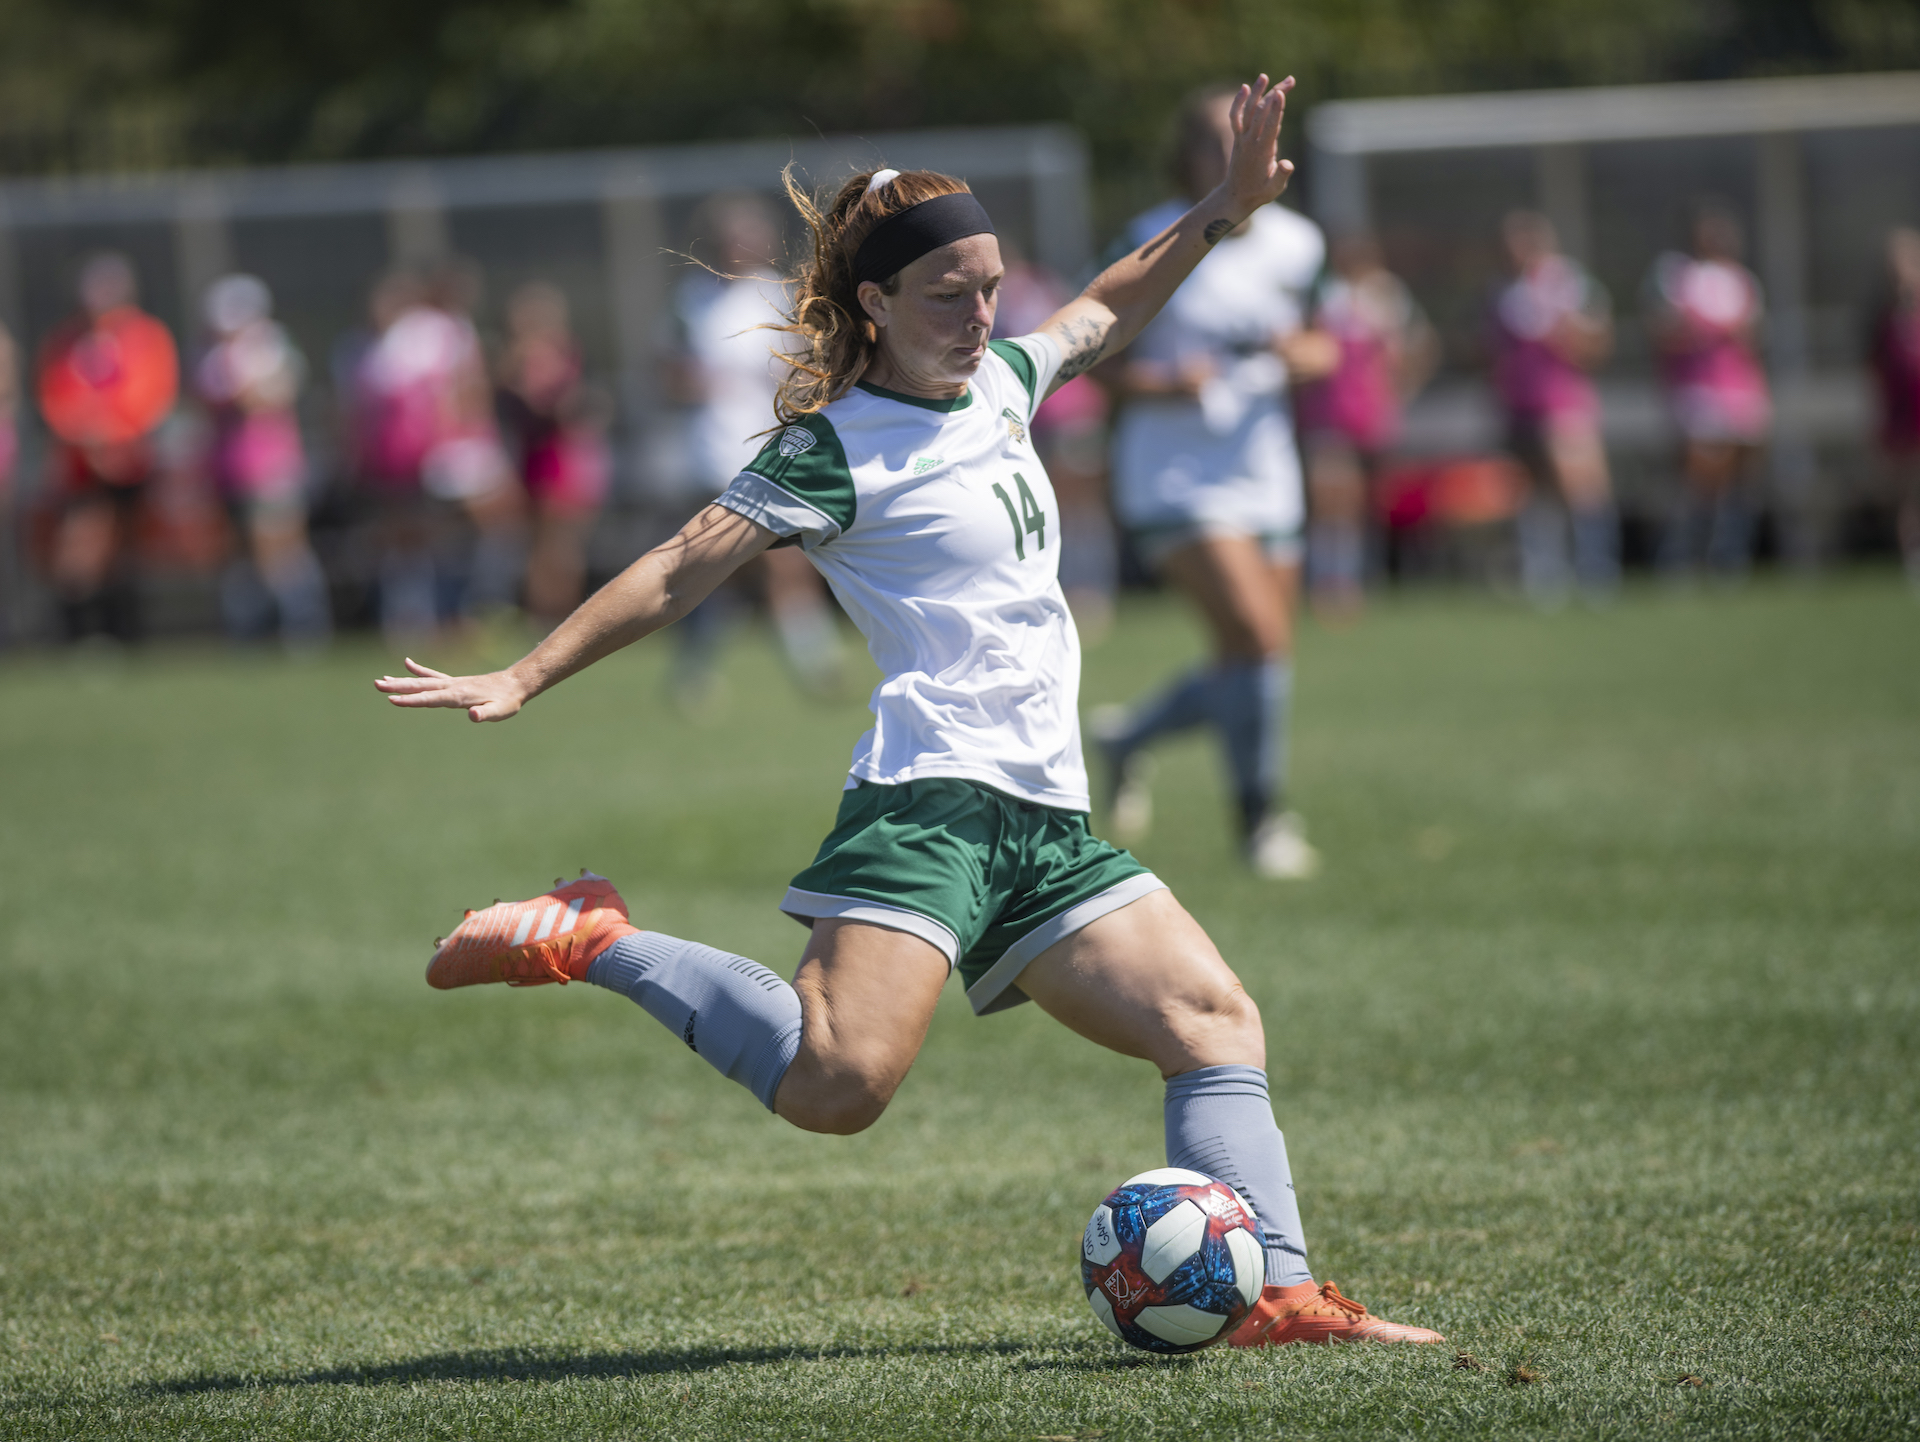  Victoria Breeden kicks the ball to a teammate on Sunday, September 8, 2019. Breeden and the Ohio Women’s Soccer team went on to win their match 7 to 0 after only scoring one goal in the first half. 